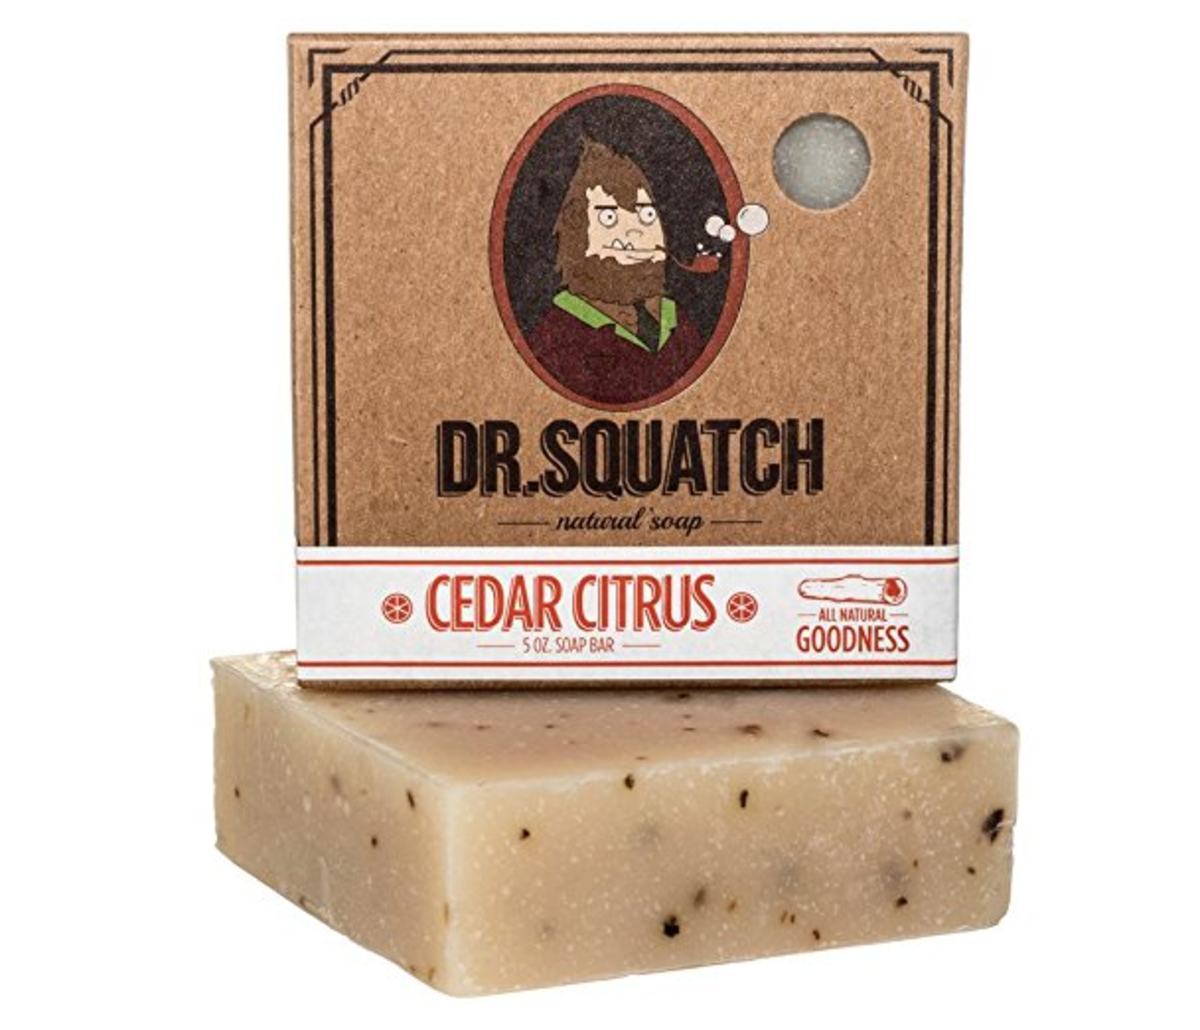 Dr. Squatch Manly Soap and Deodorant Variety Pack - Handmade with